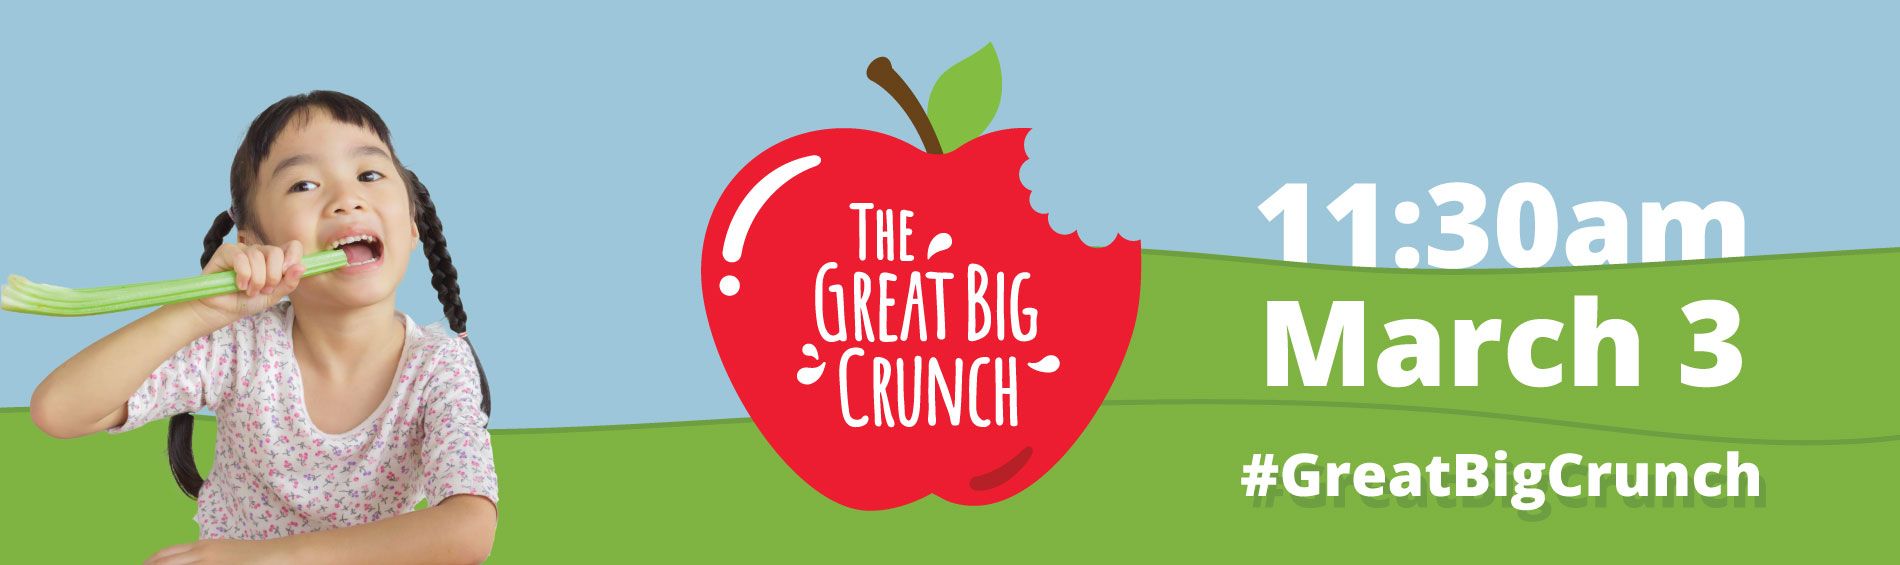 The Great Big Crunch 